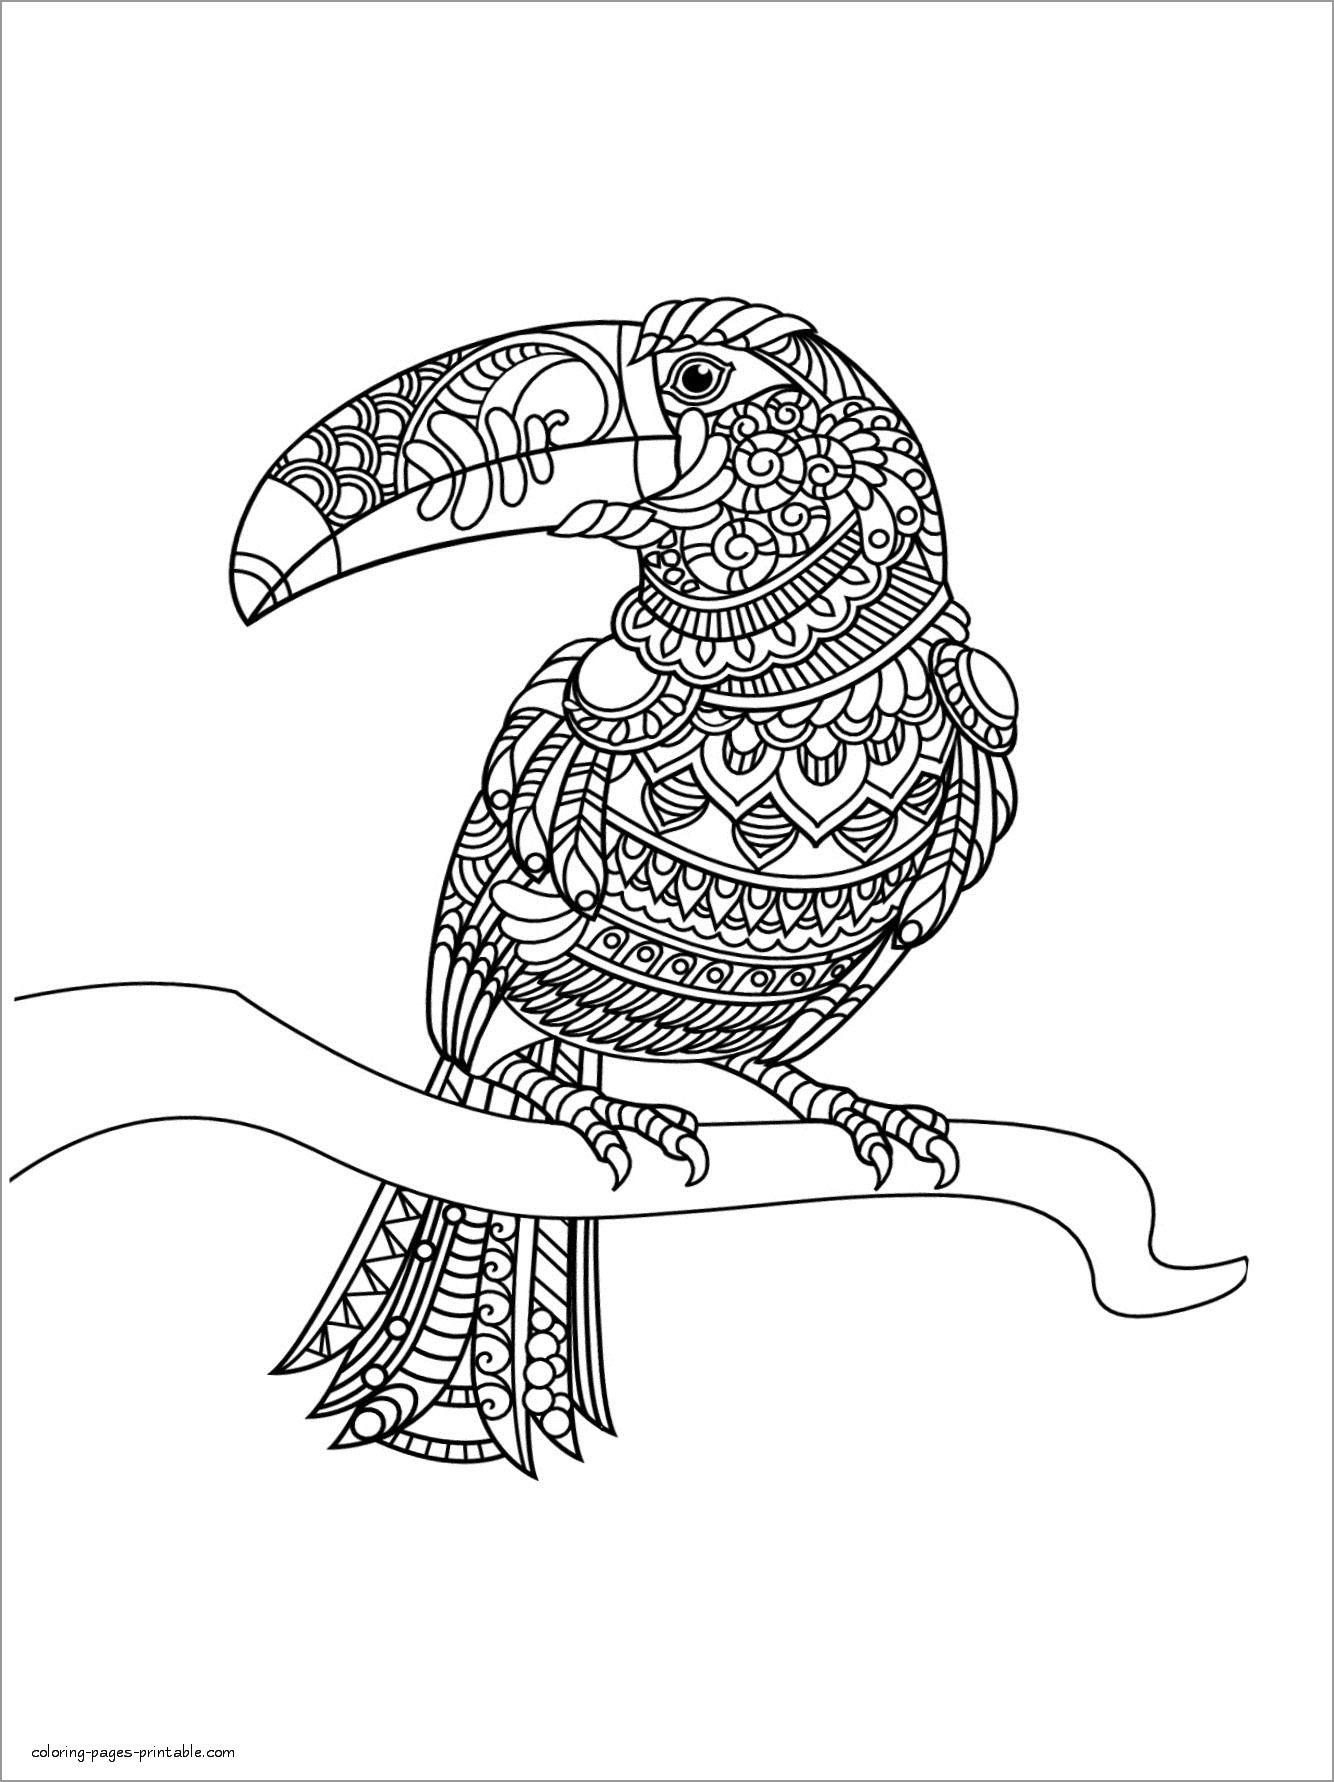 Coloringbay Page 3 Of 23 Download Free Printable Coloring Pages